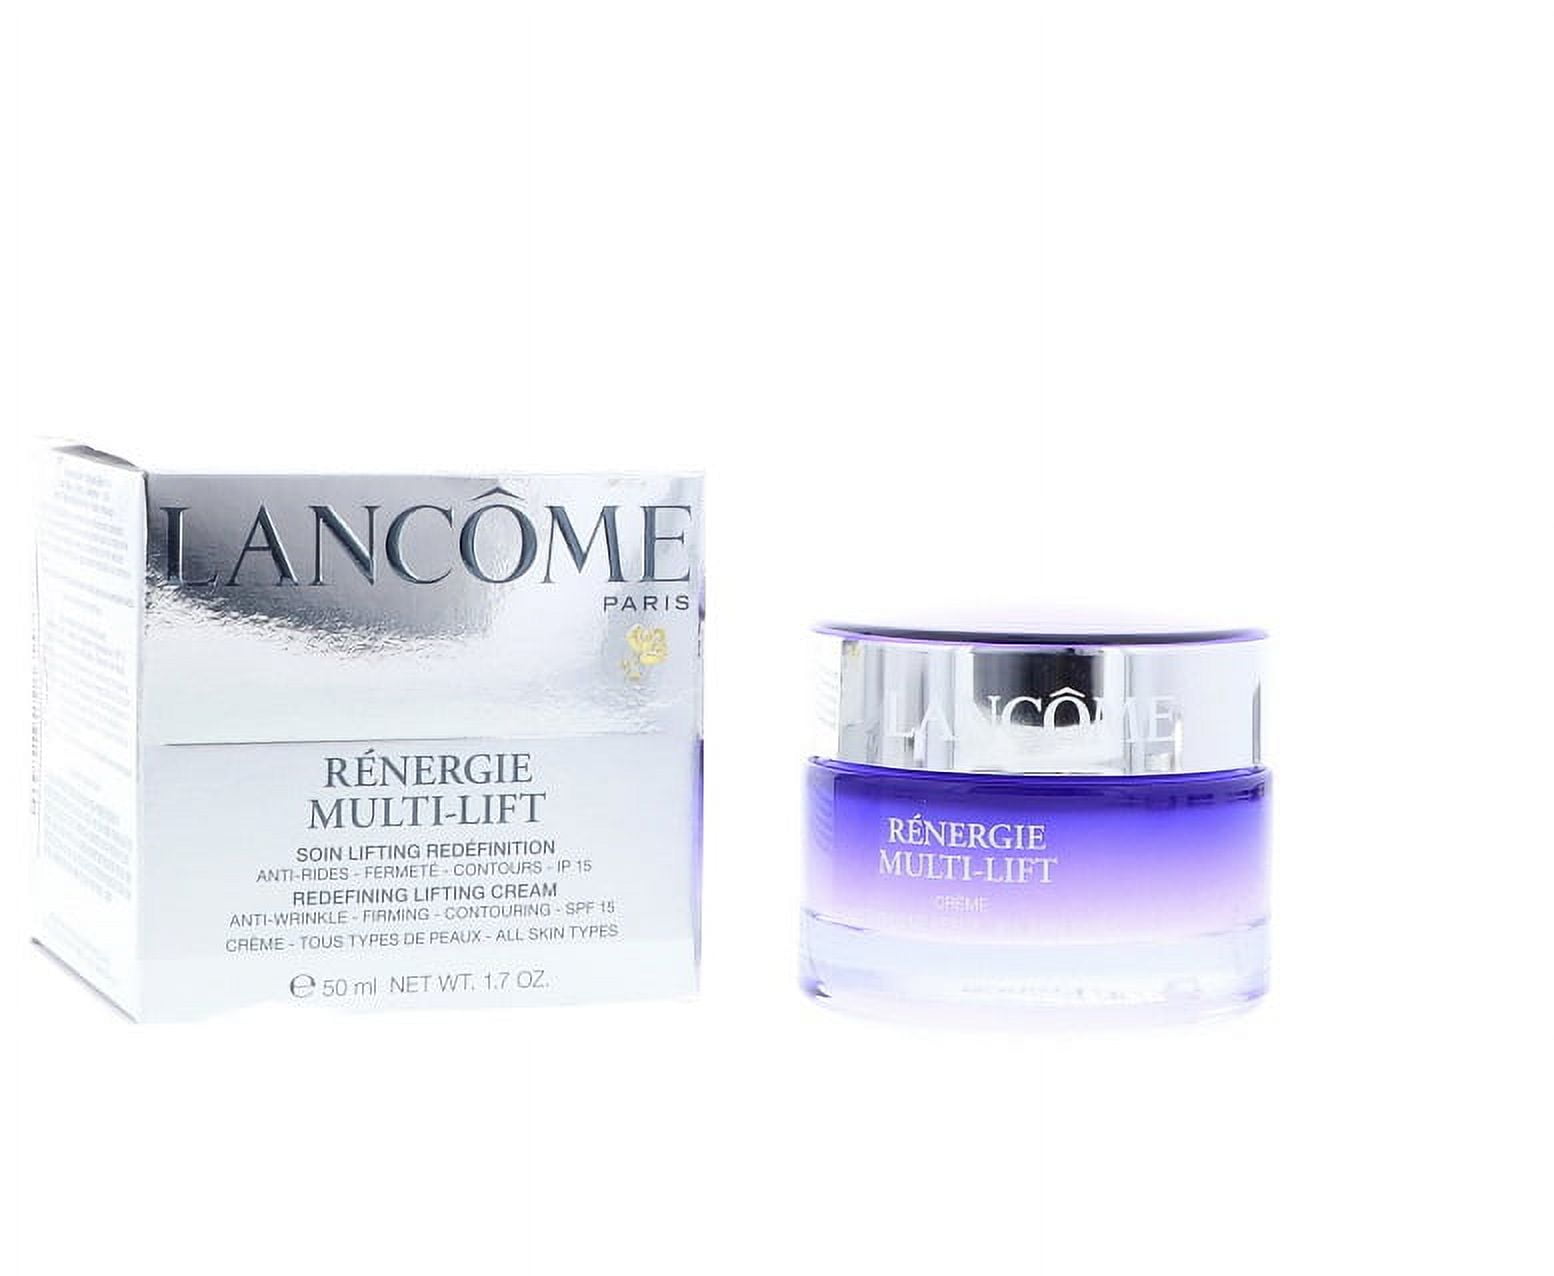 Lancome Renergie Cream oz All Types, Multi-Lift 1.7 Skin for